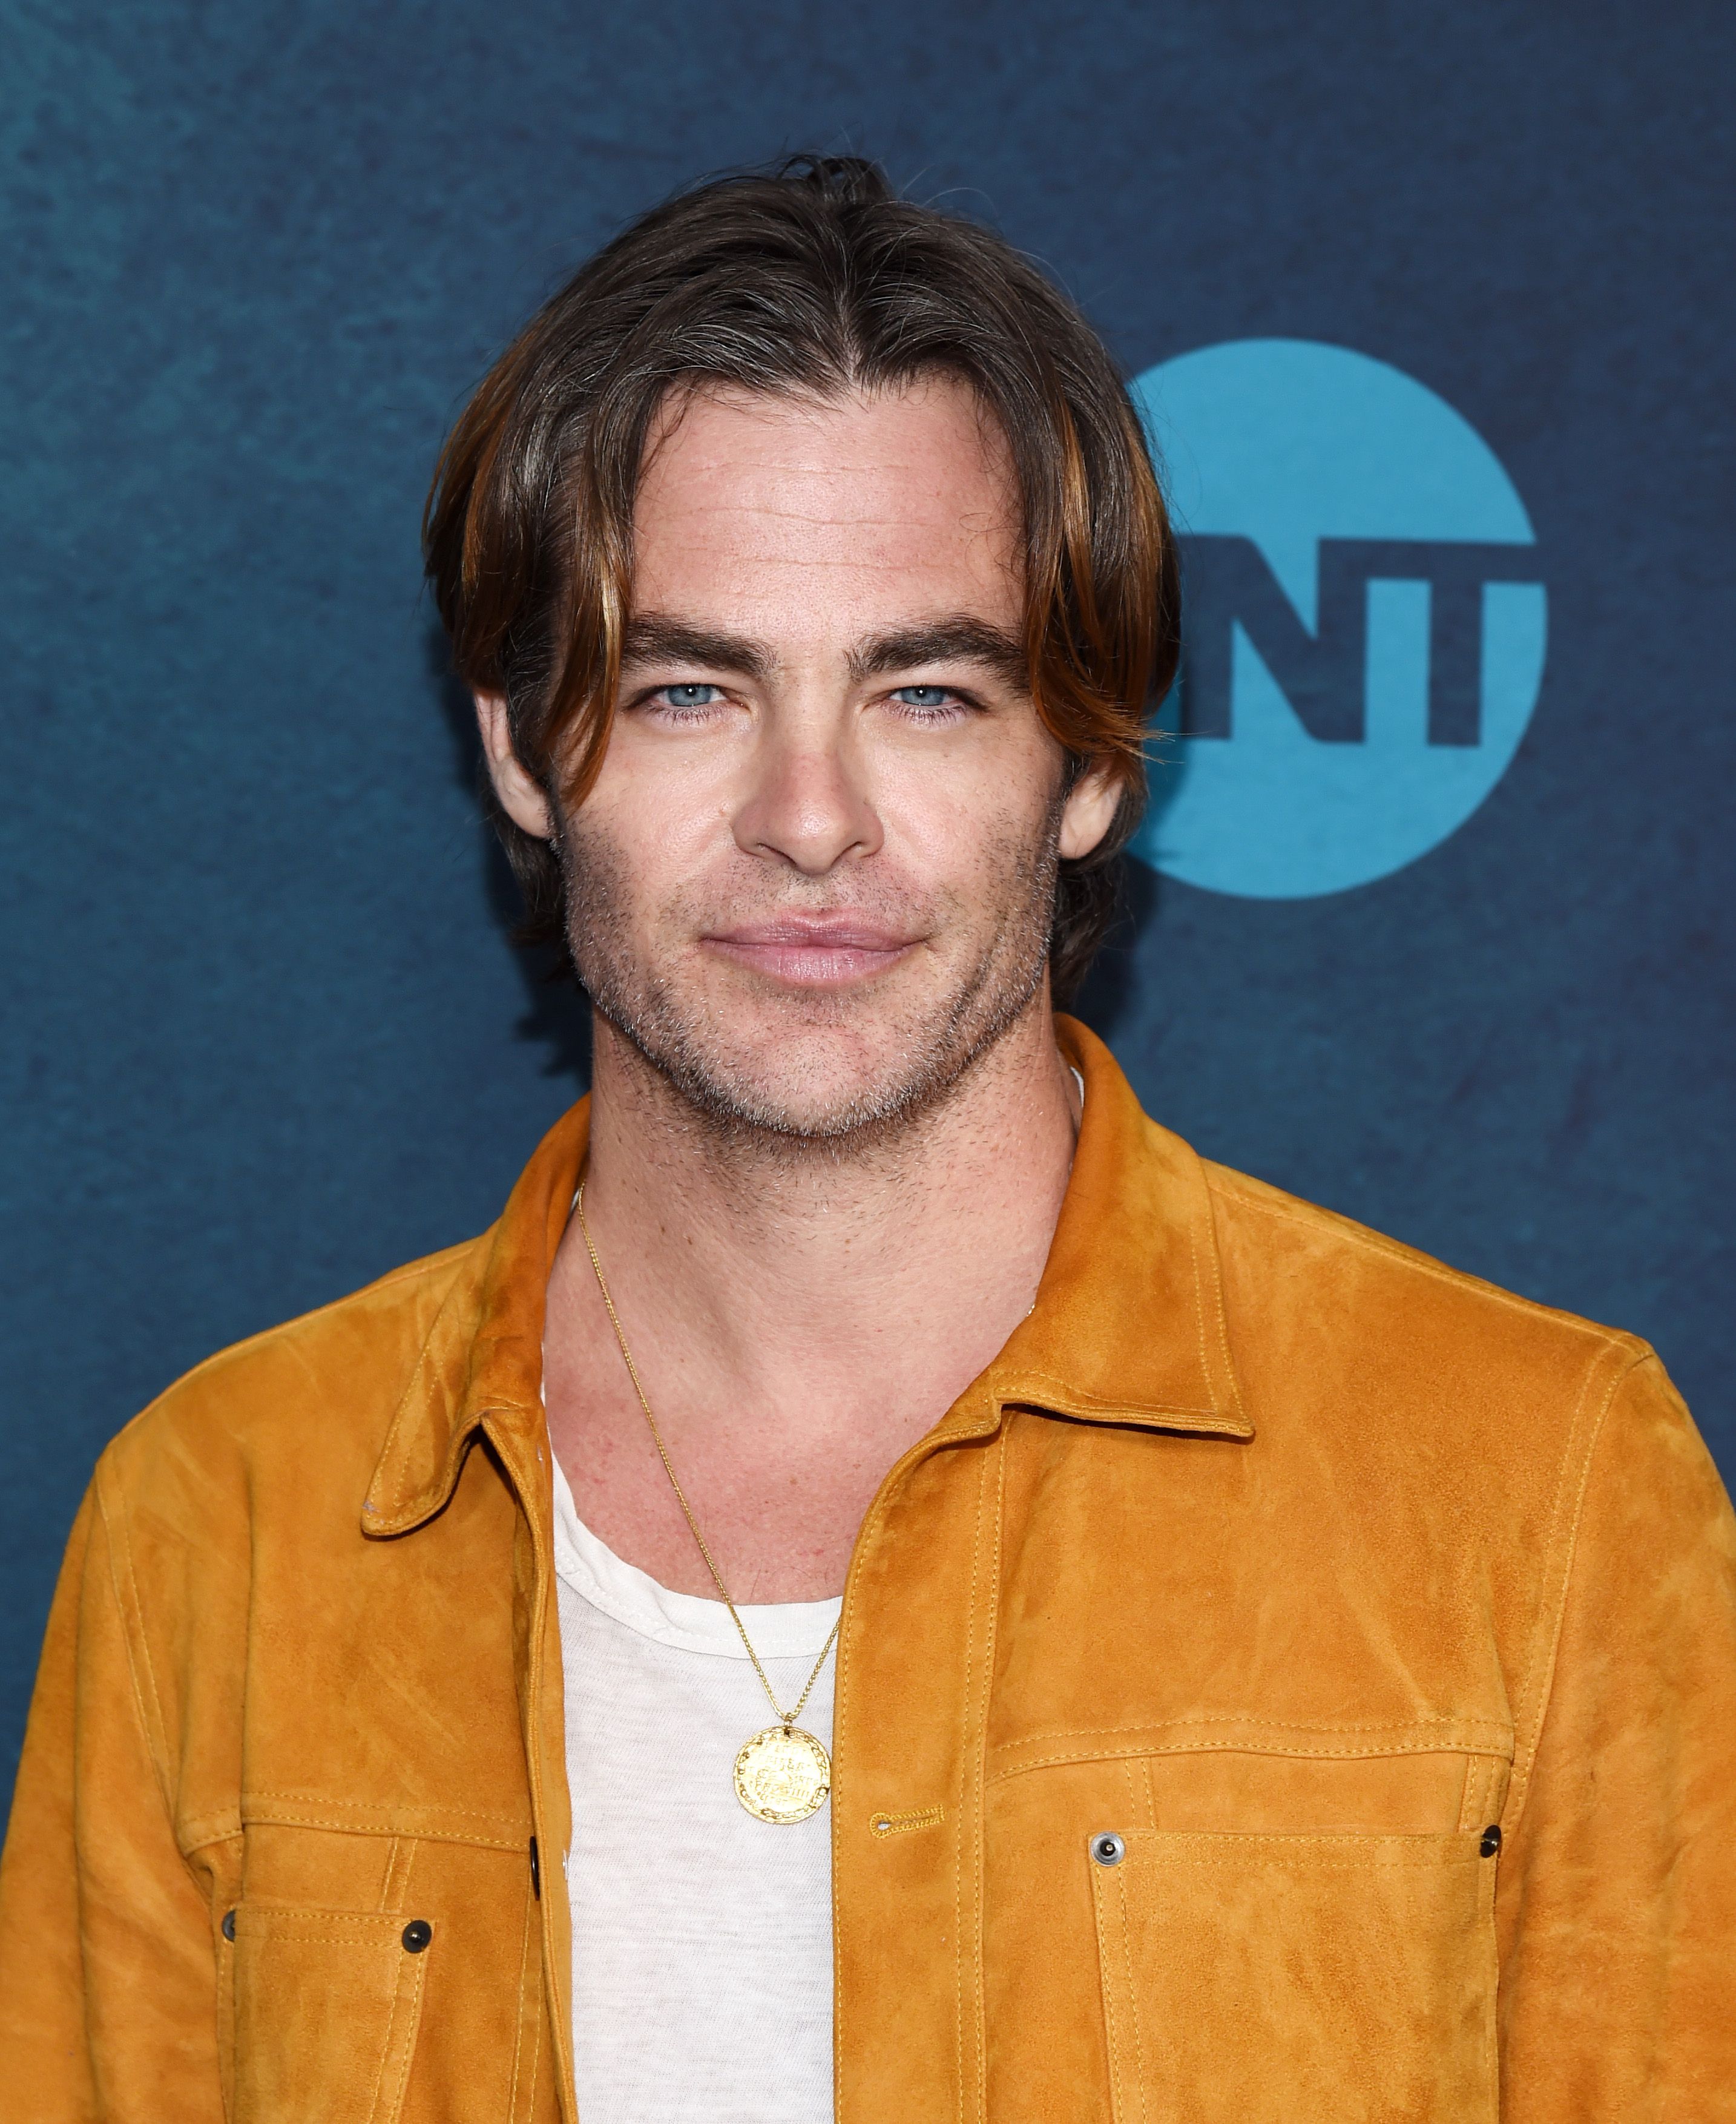 Chris Pine during the TNT's "I Am The Night" EMMY For Your Consideration Event at the Television Academy on May 9, 2019, in Los Angeles, California. | Source: Getty Images